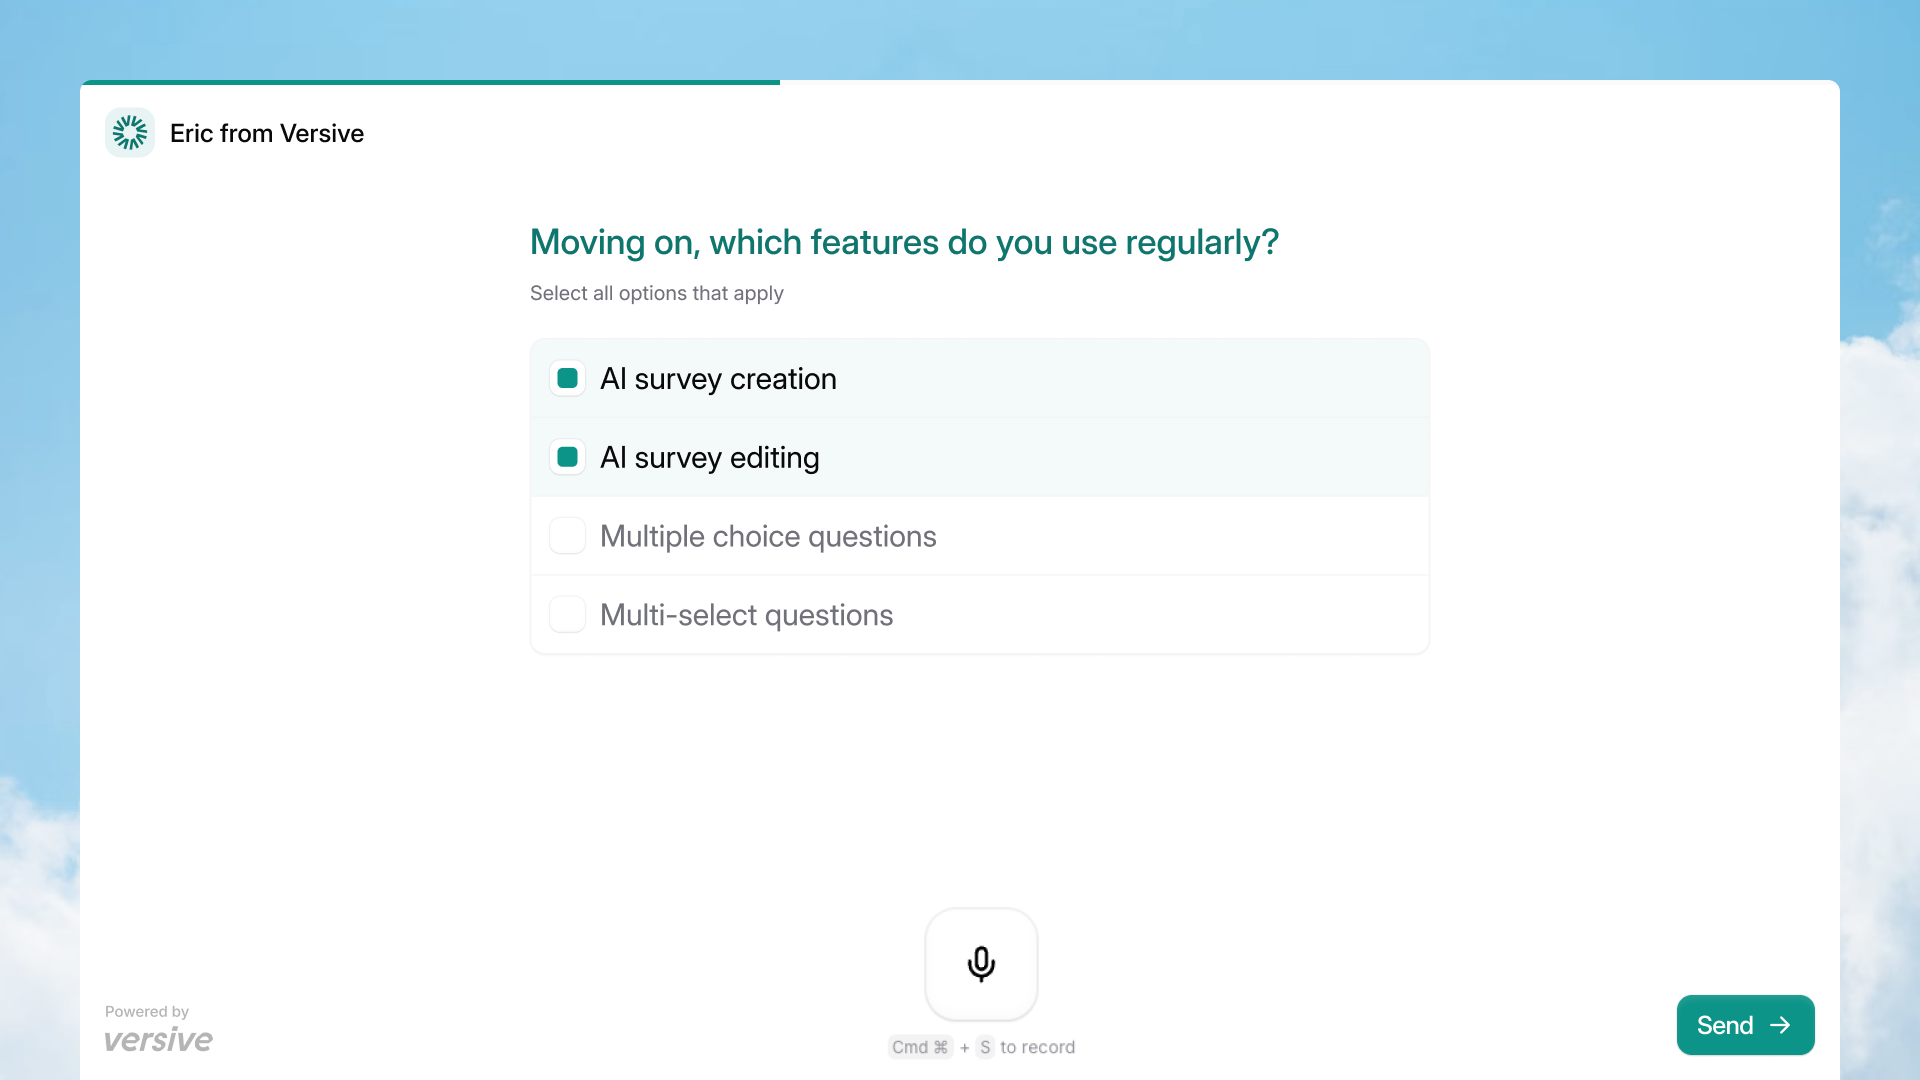 AI survey building, structured questions, and faster surveys